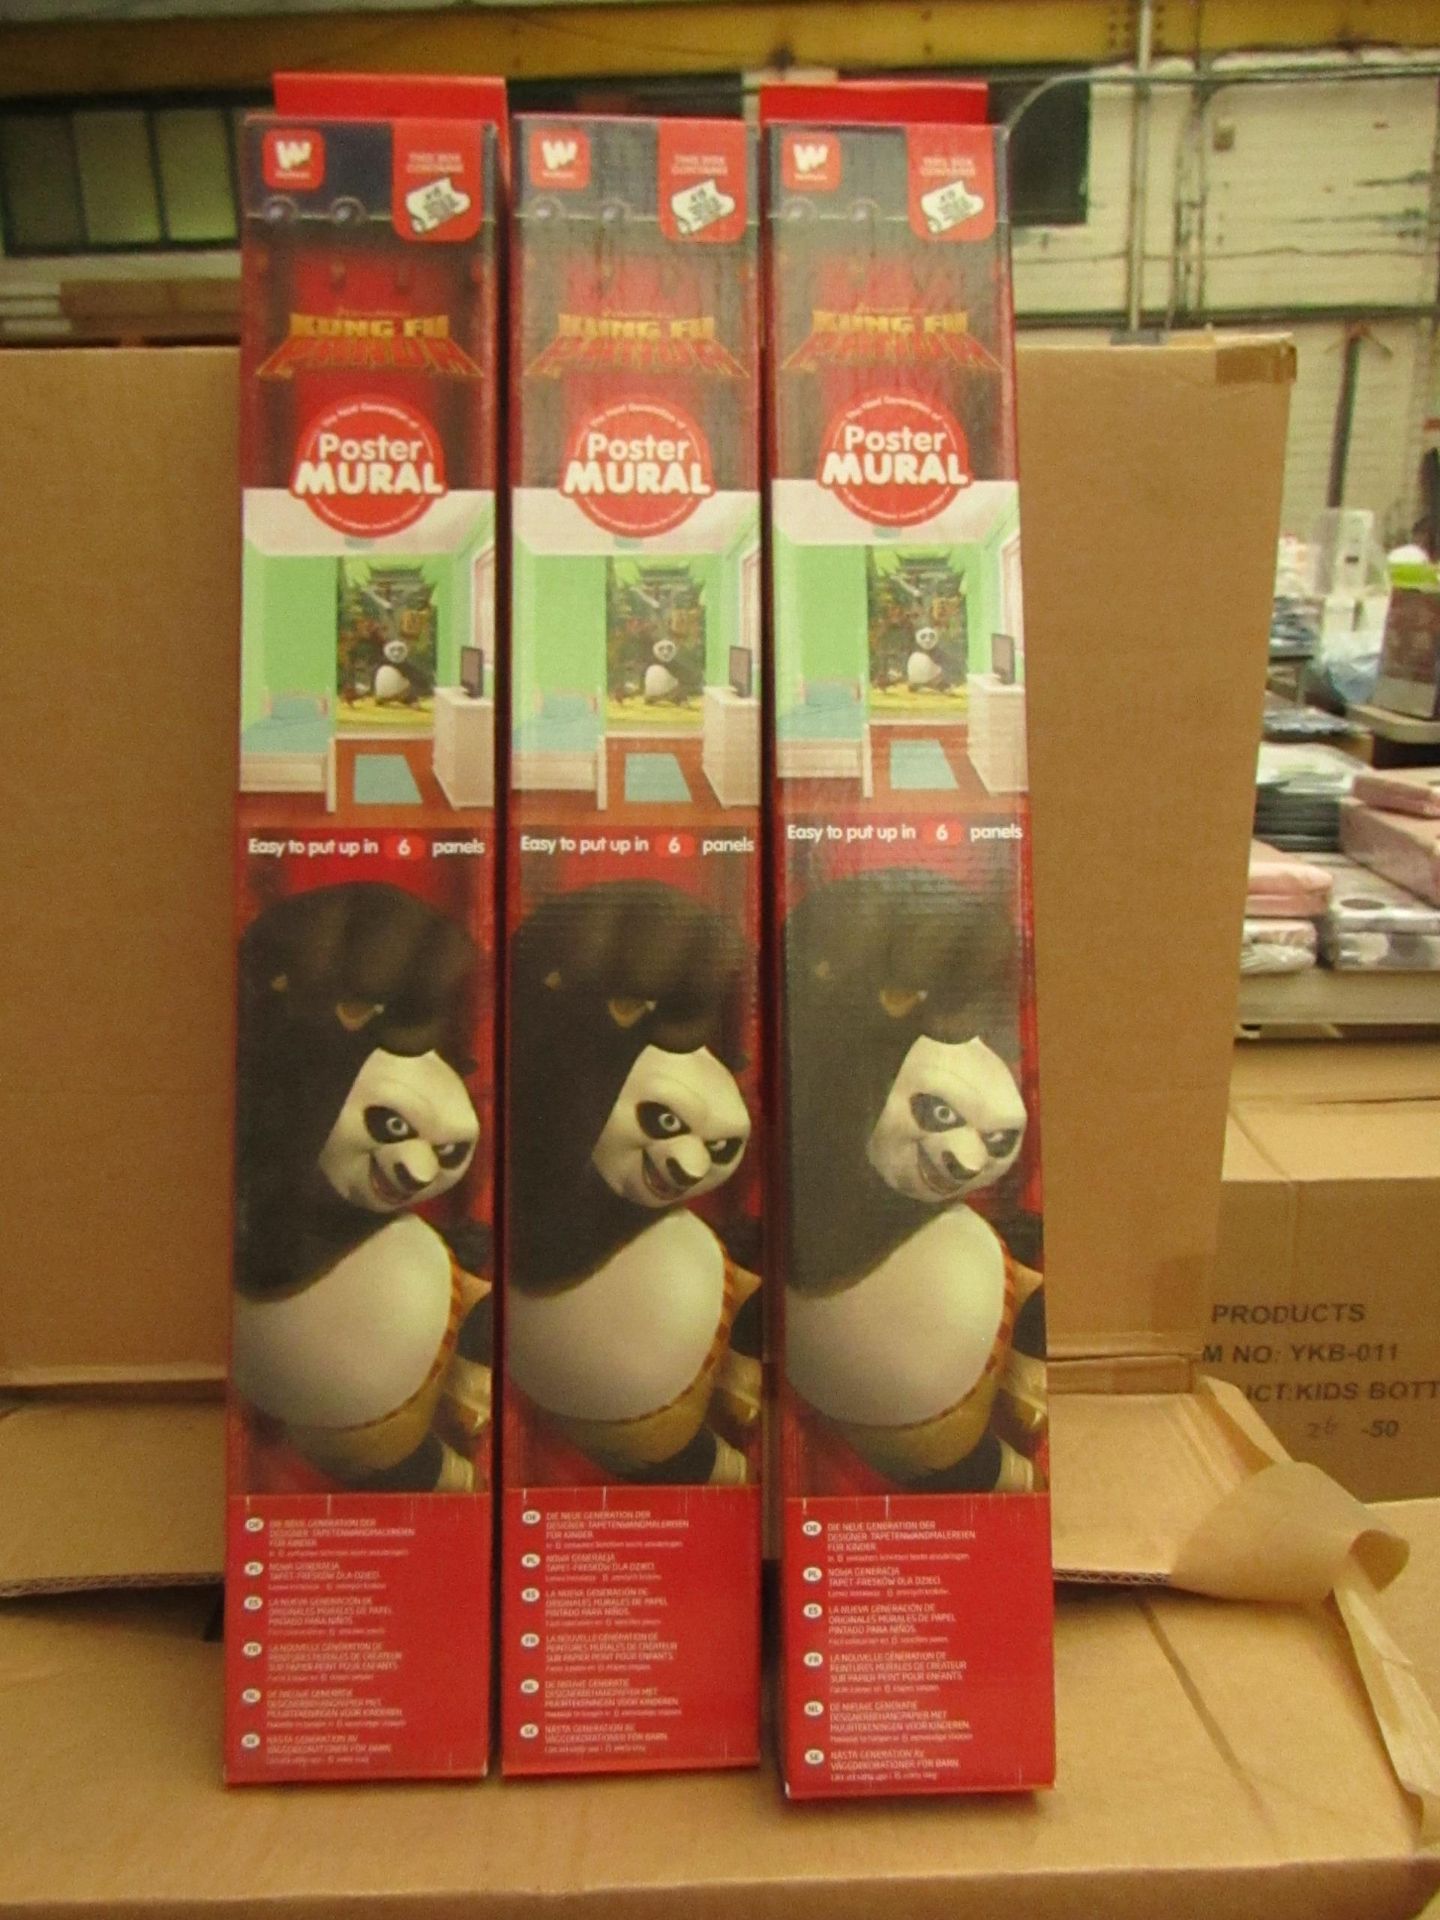 1 x Walltastic Kung Fu Panda Wall Mural. Easy To Put up in 6 Panels. Overall Size 8ft x 5ft. Easily